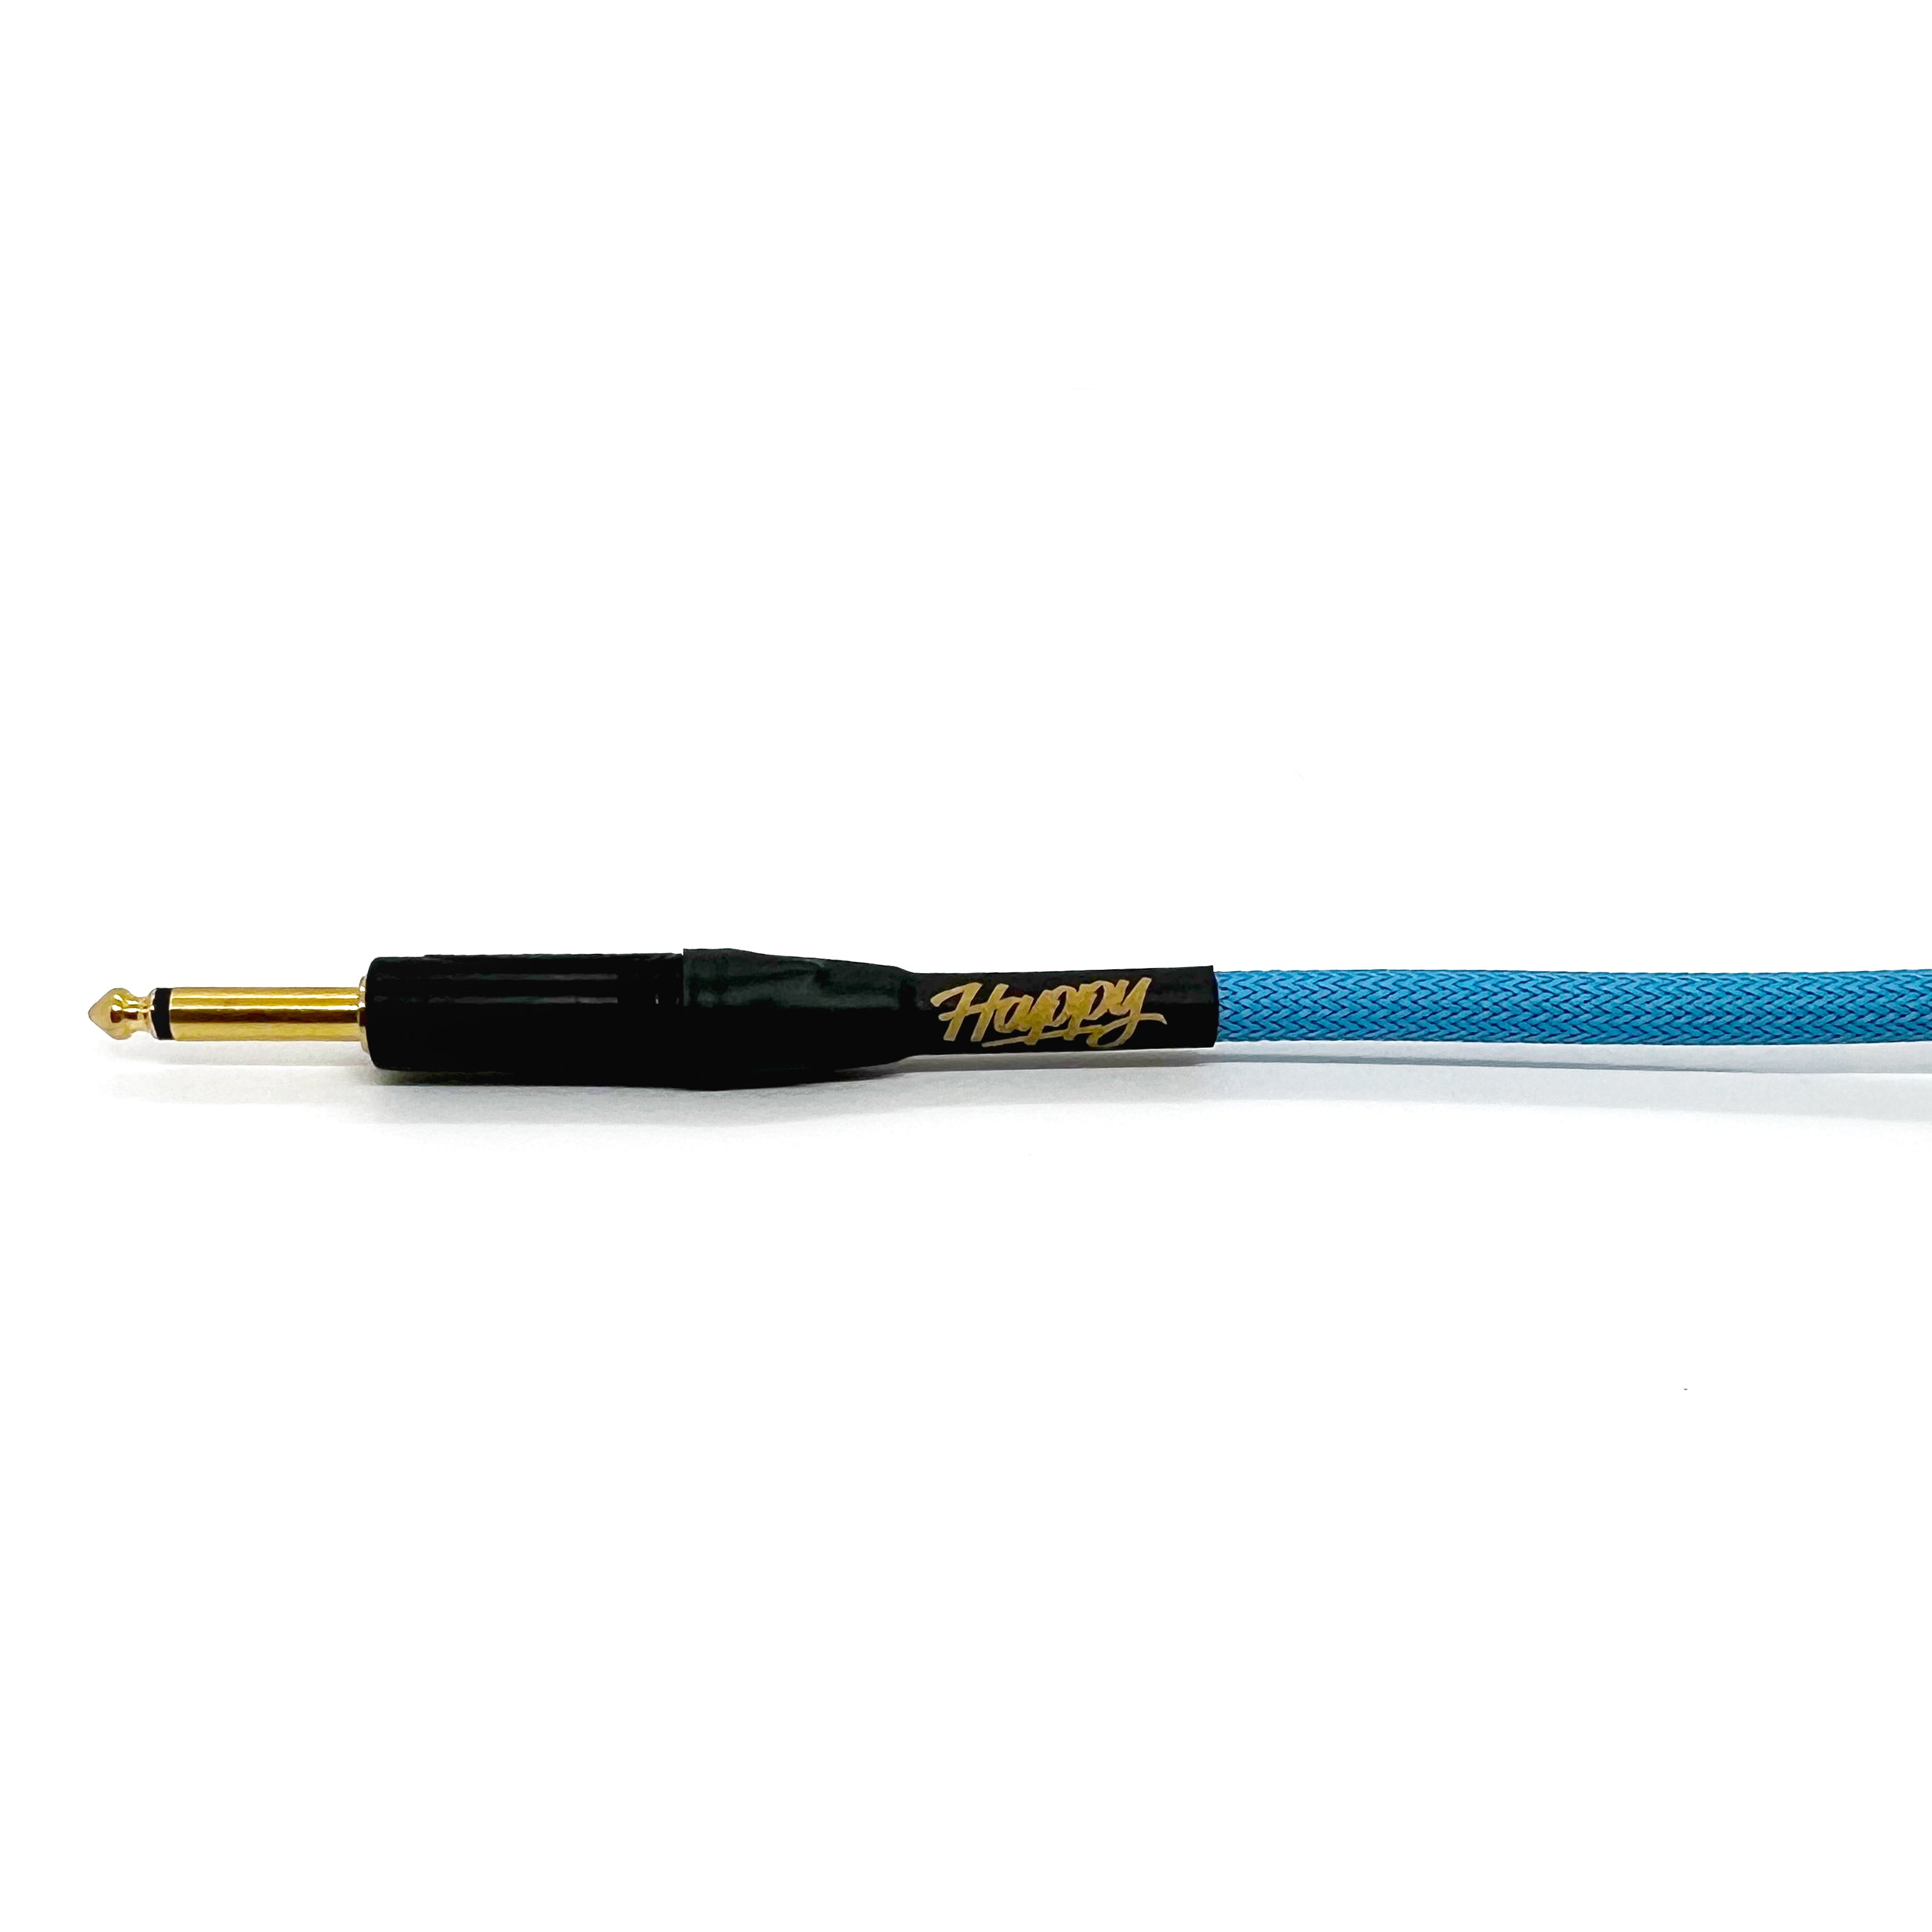 The Kiesel Silent Instrument Cable - Riviera Blue